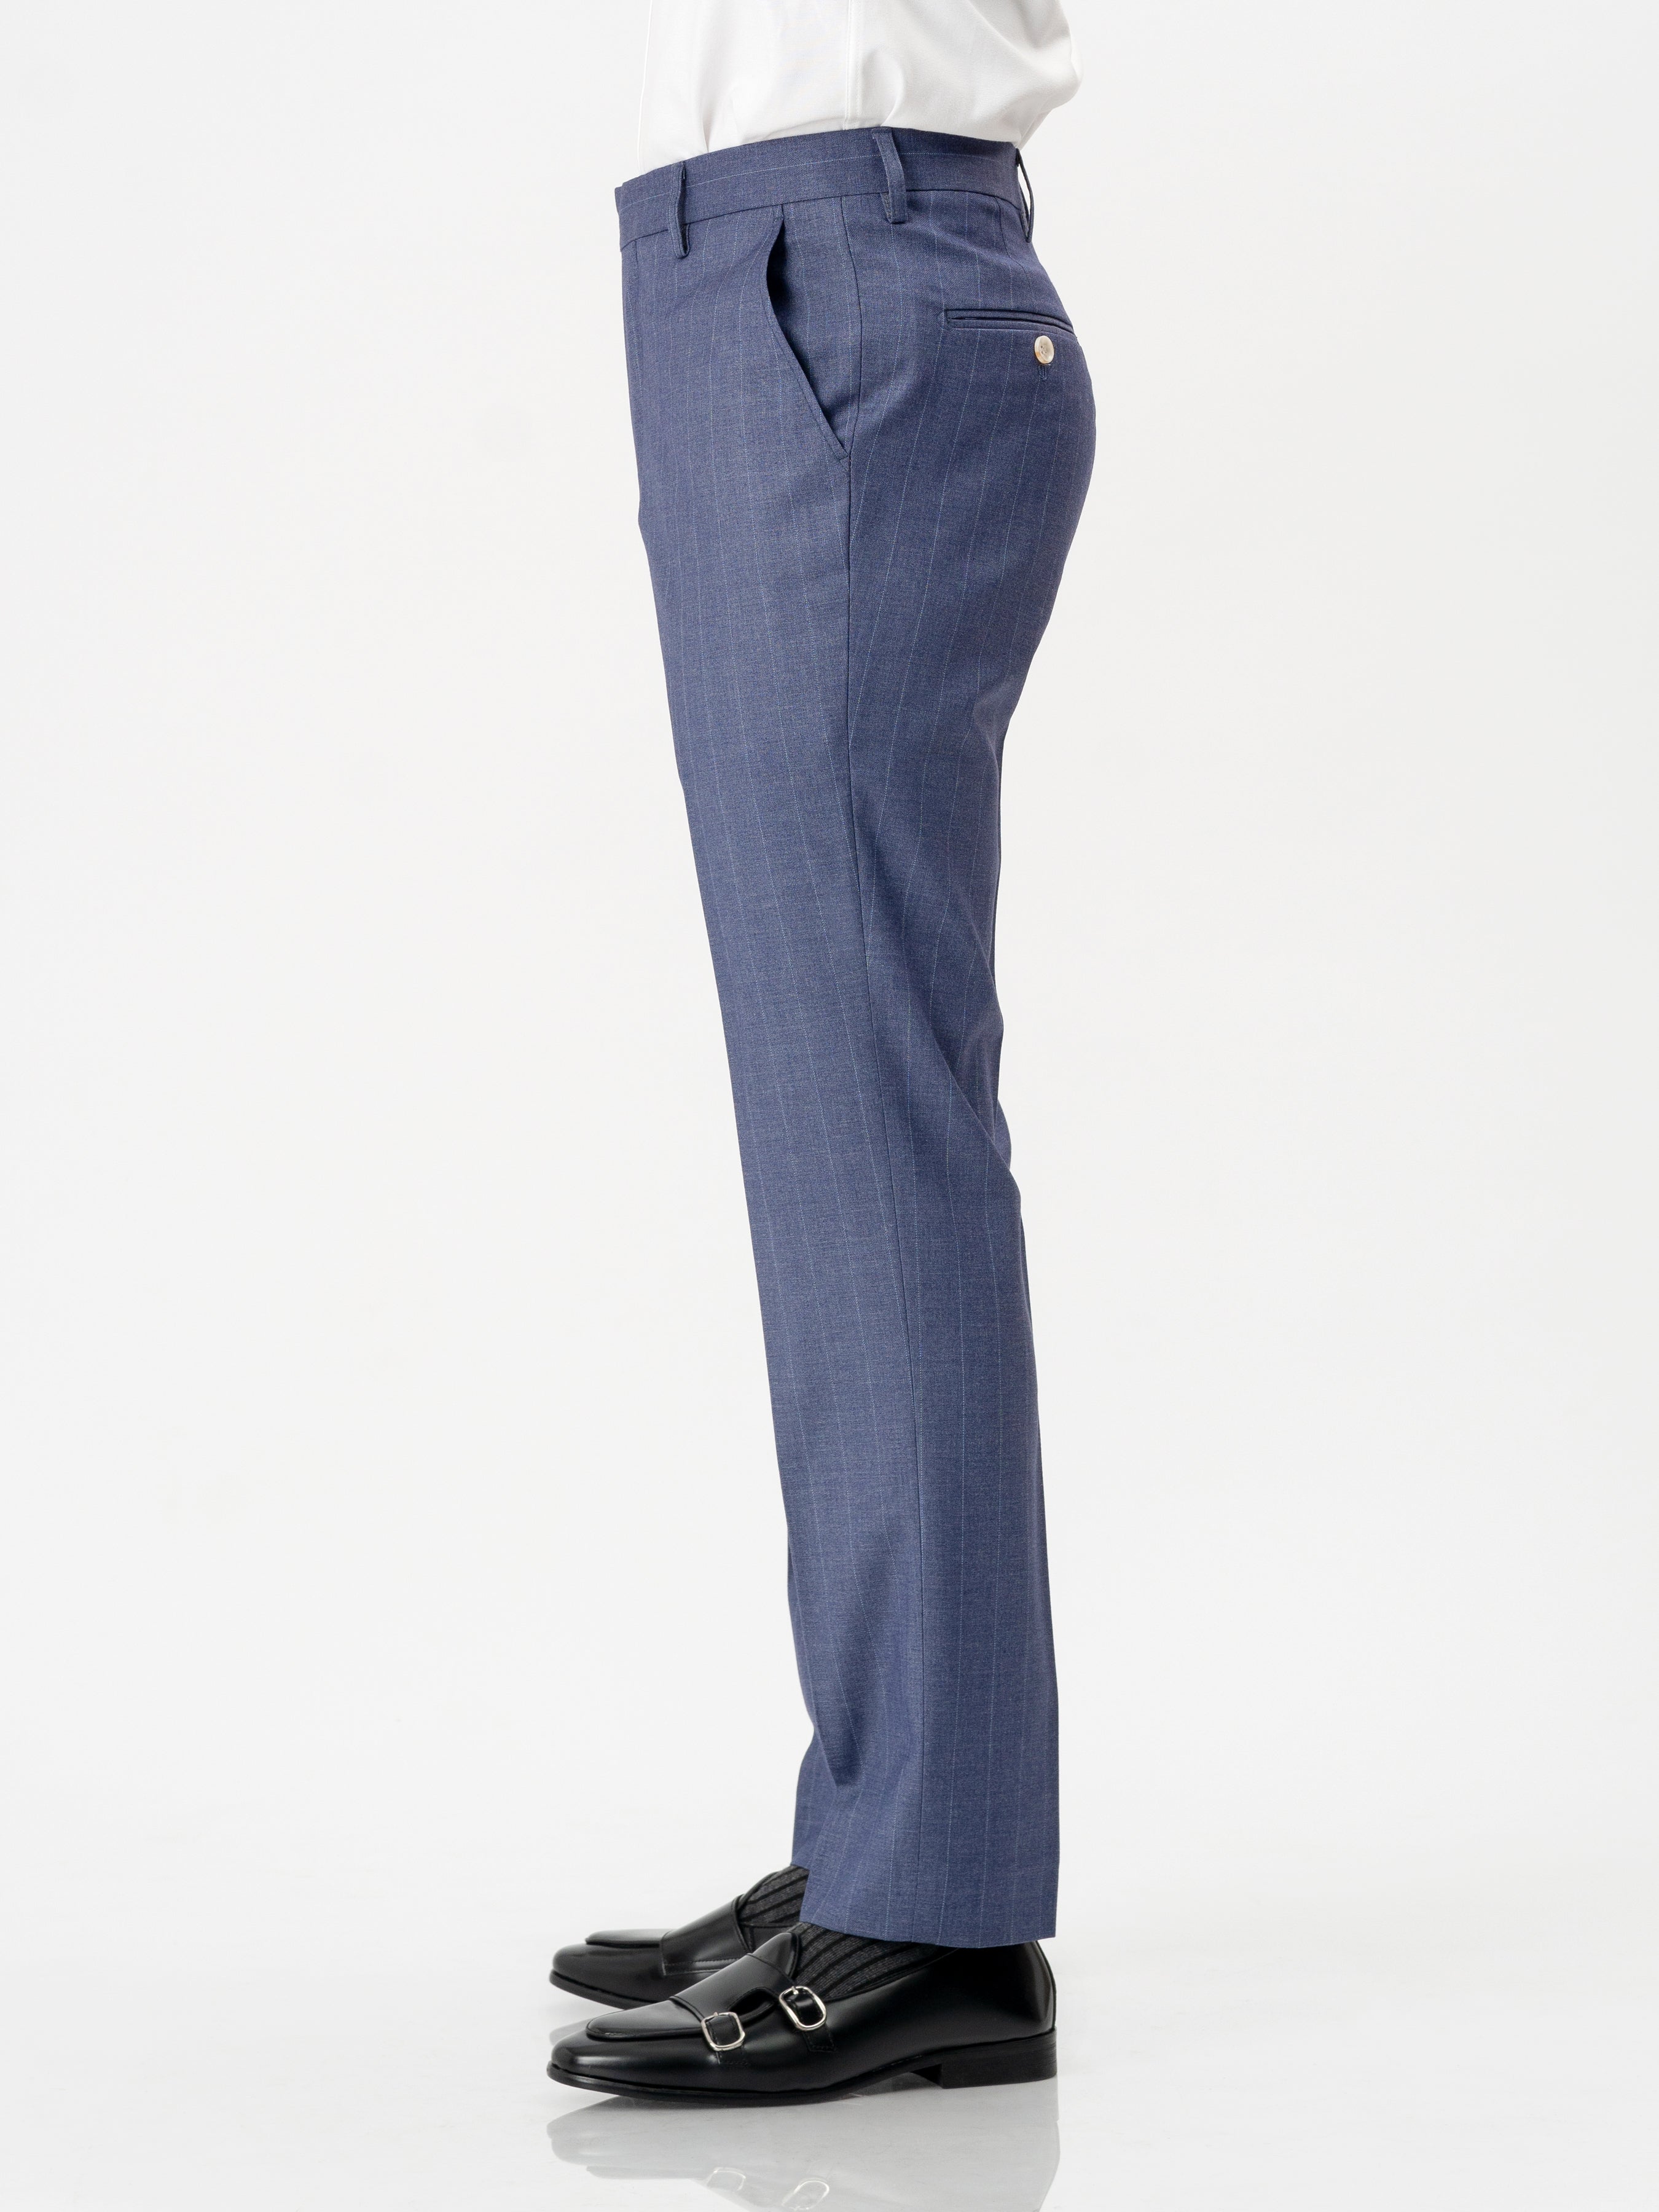 Trousers With Belt Loop - Iris Blue Stripes (Stretchable)